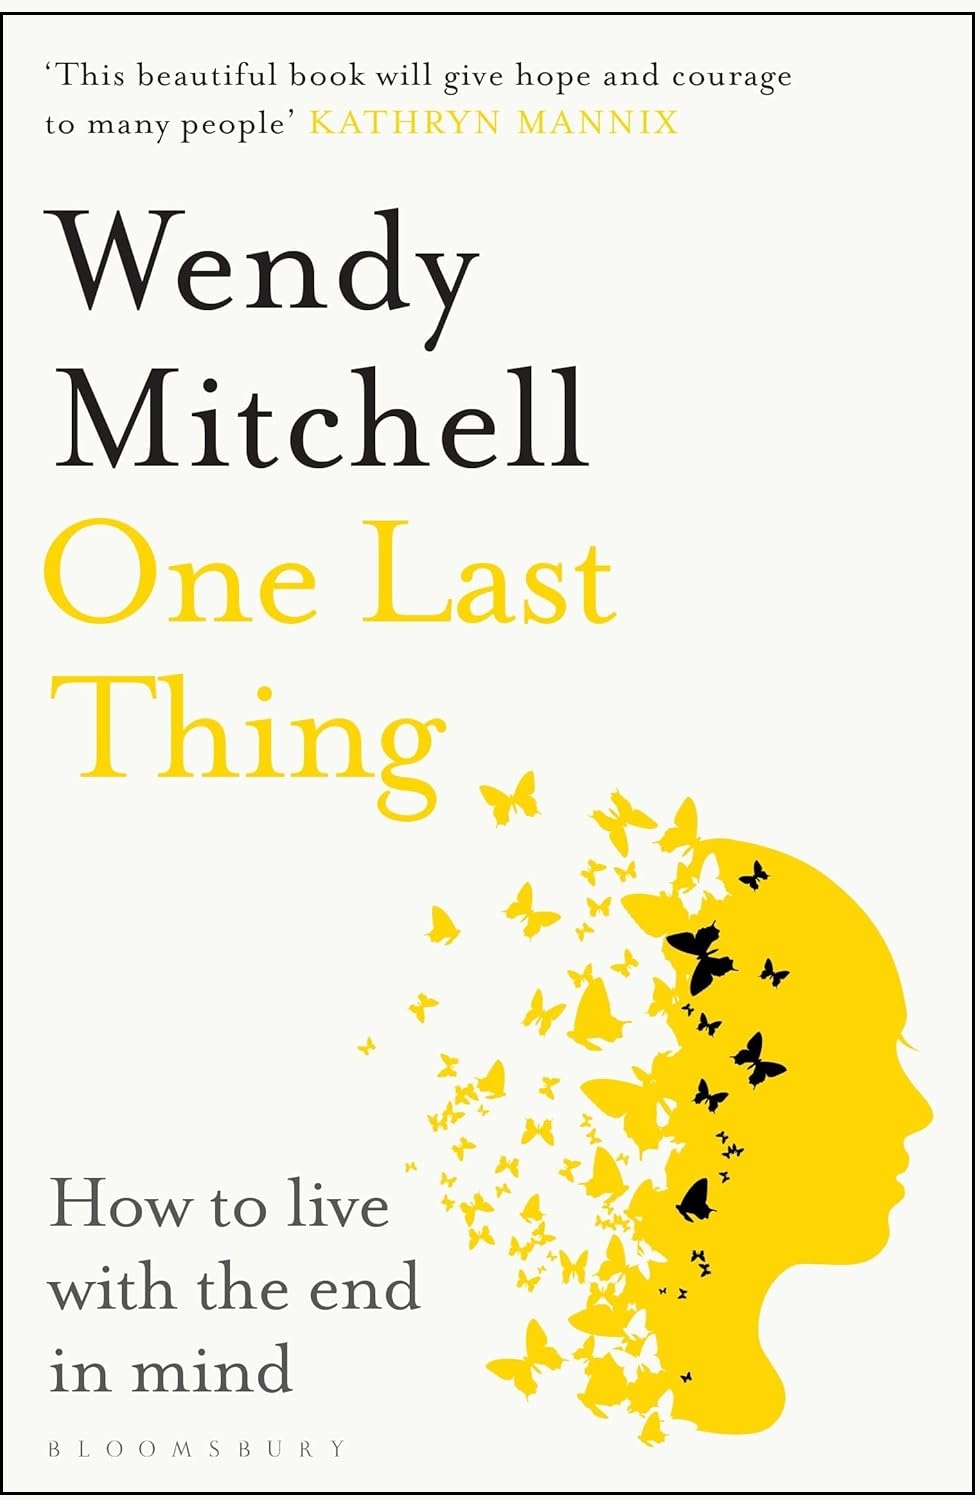 One Last Thing: How to live with the end in mind